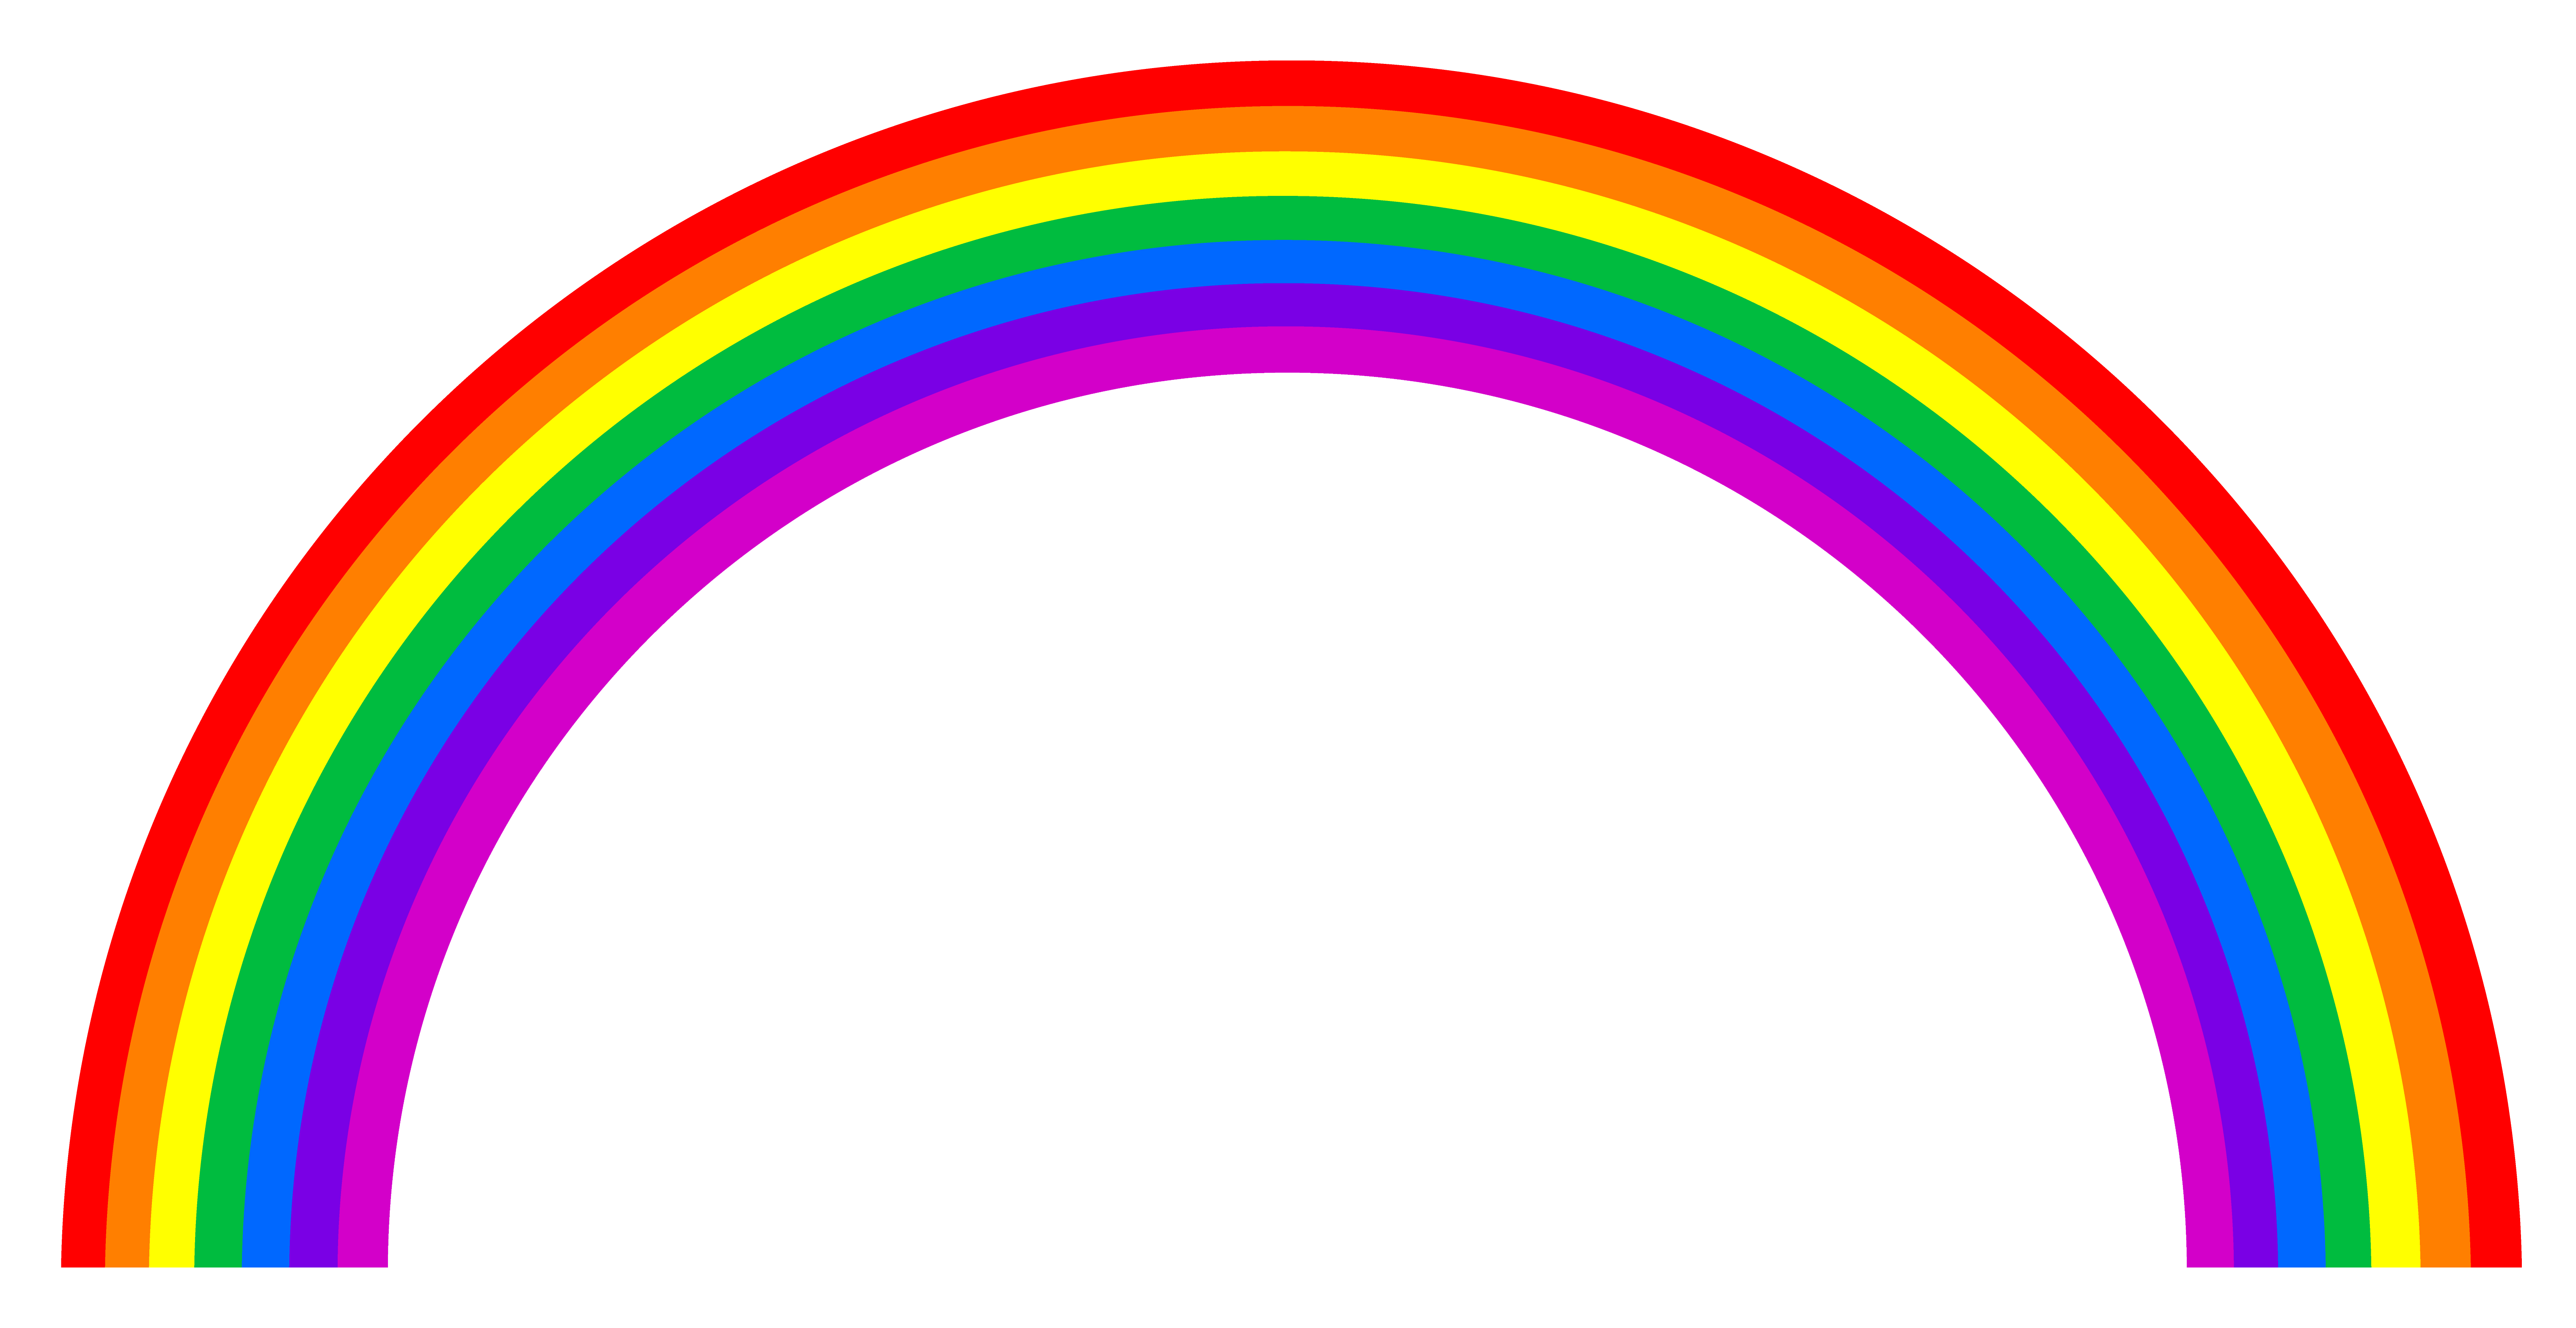 Rainbow Clipart For Kids | Clipart Panda - Free Clipart Images